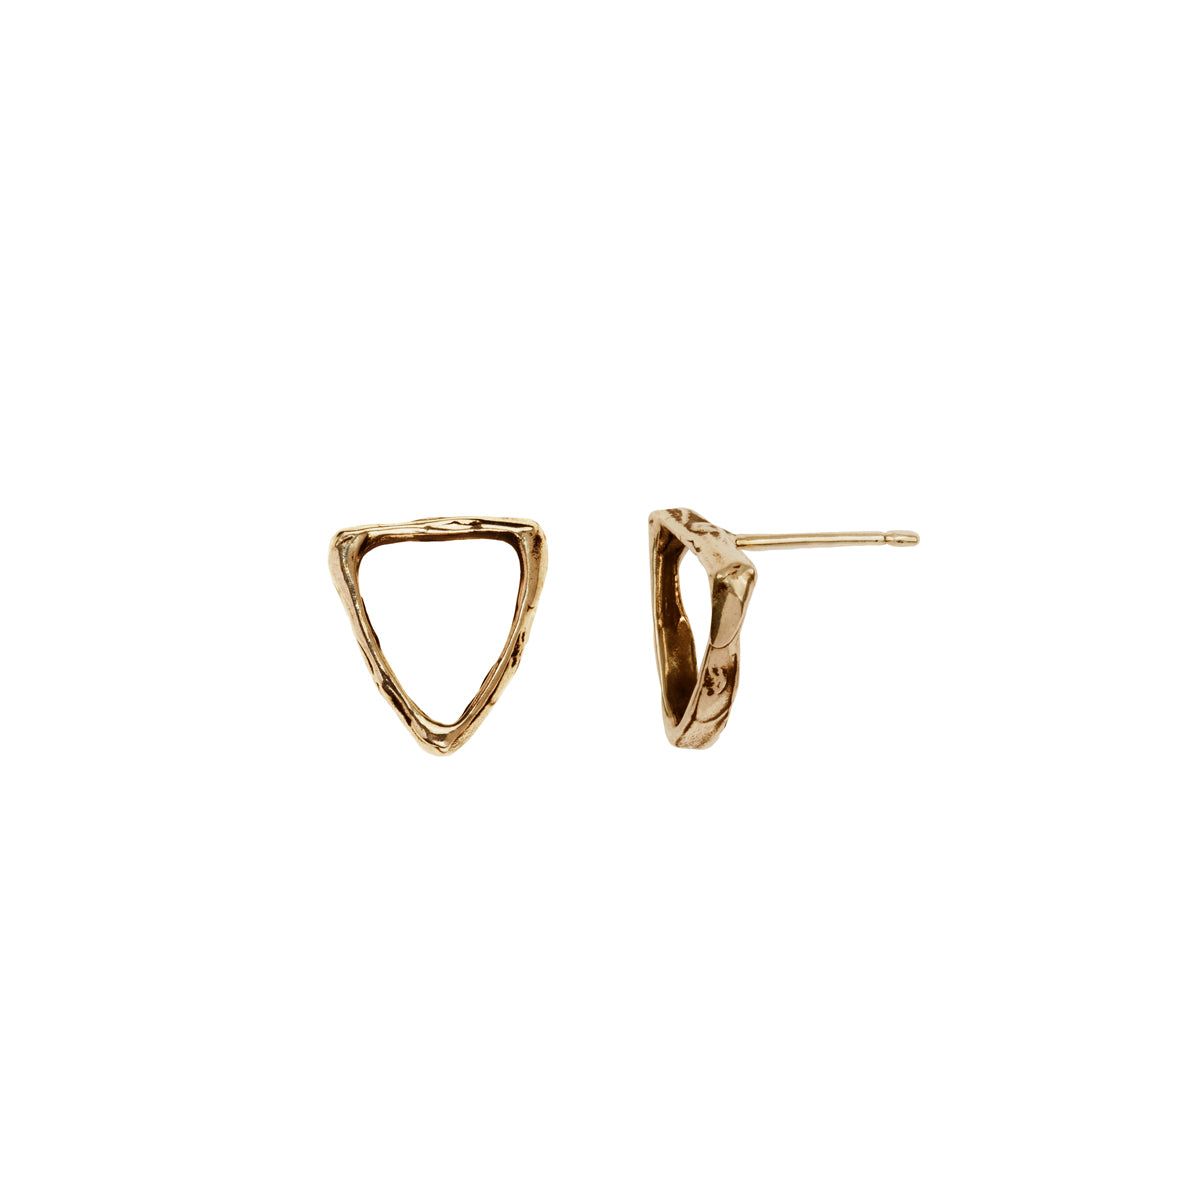 A set of extra small 14k gold stud earrings with an open shield design.